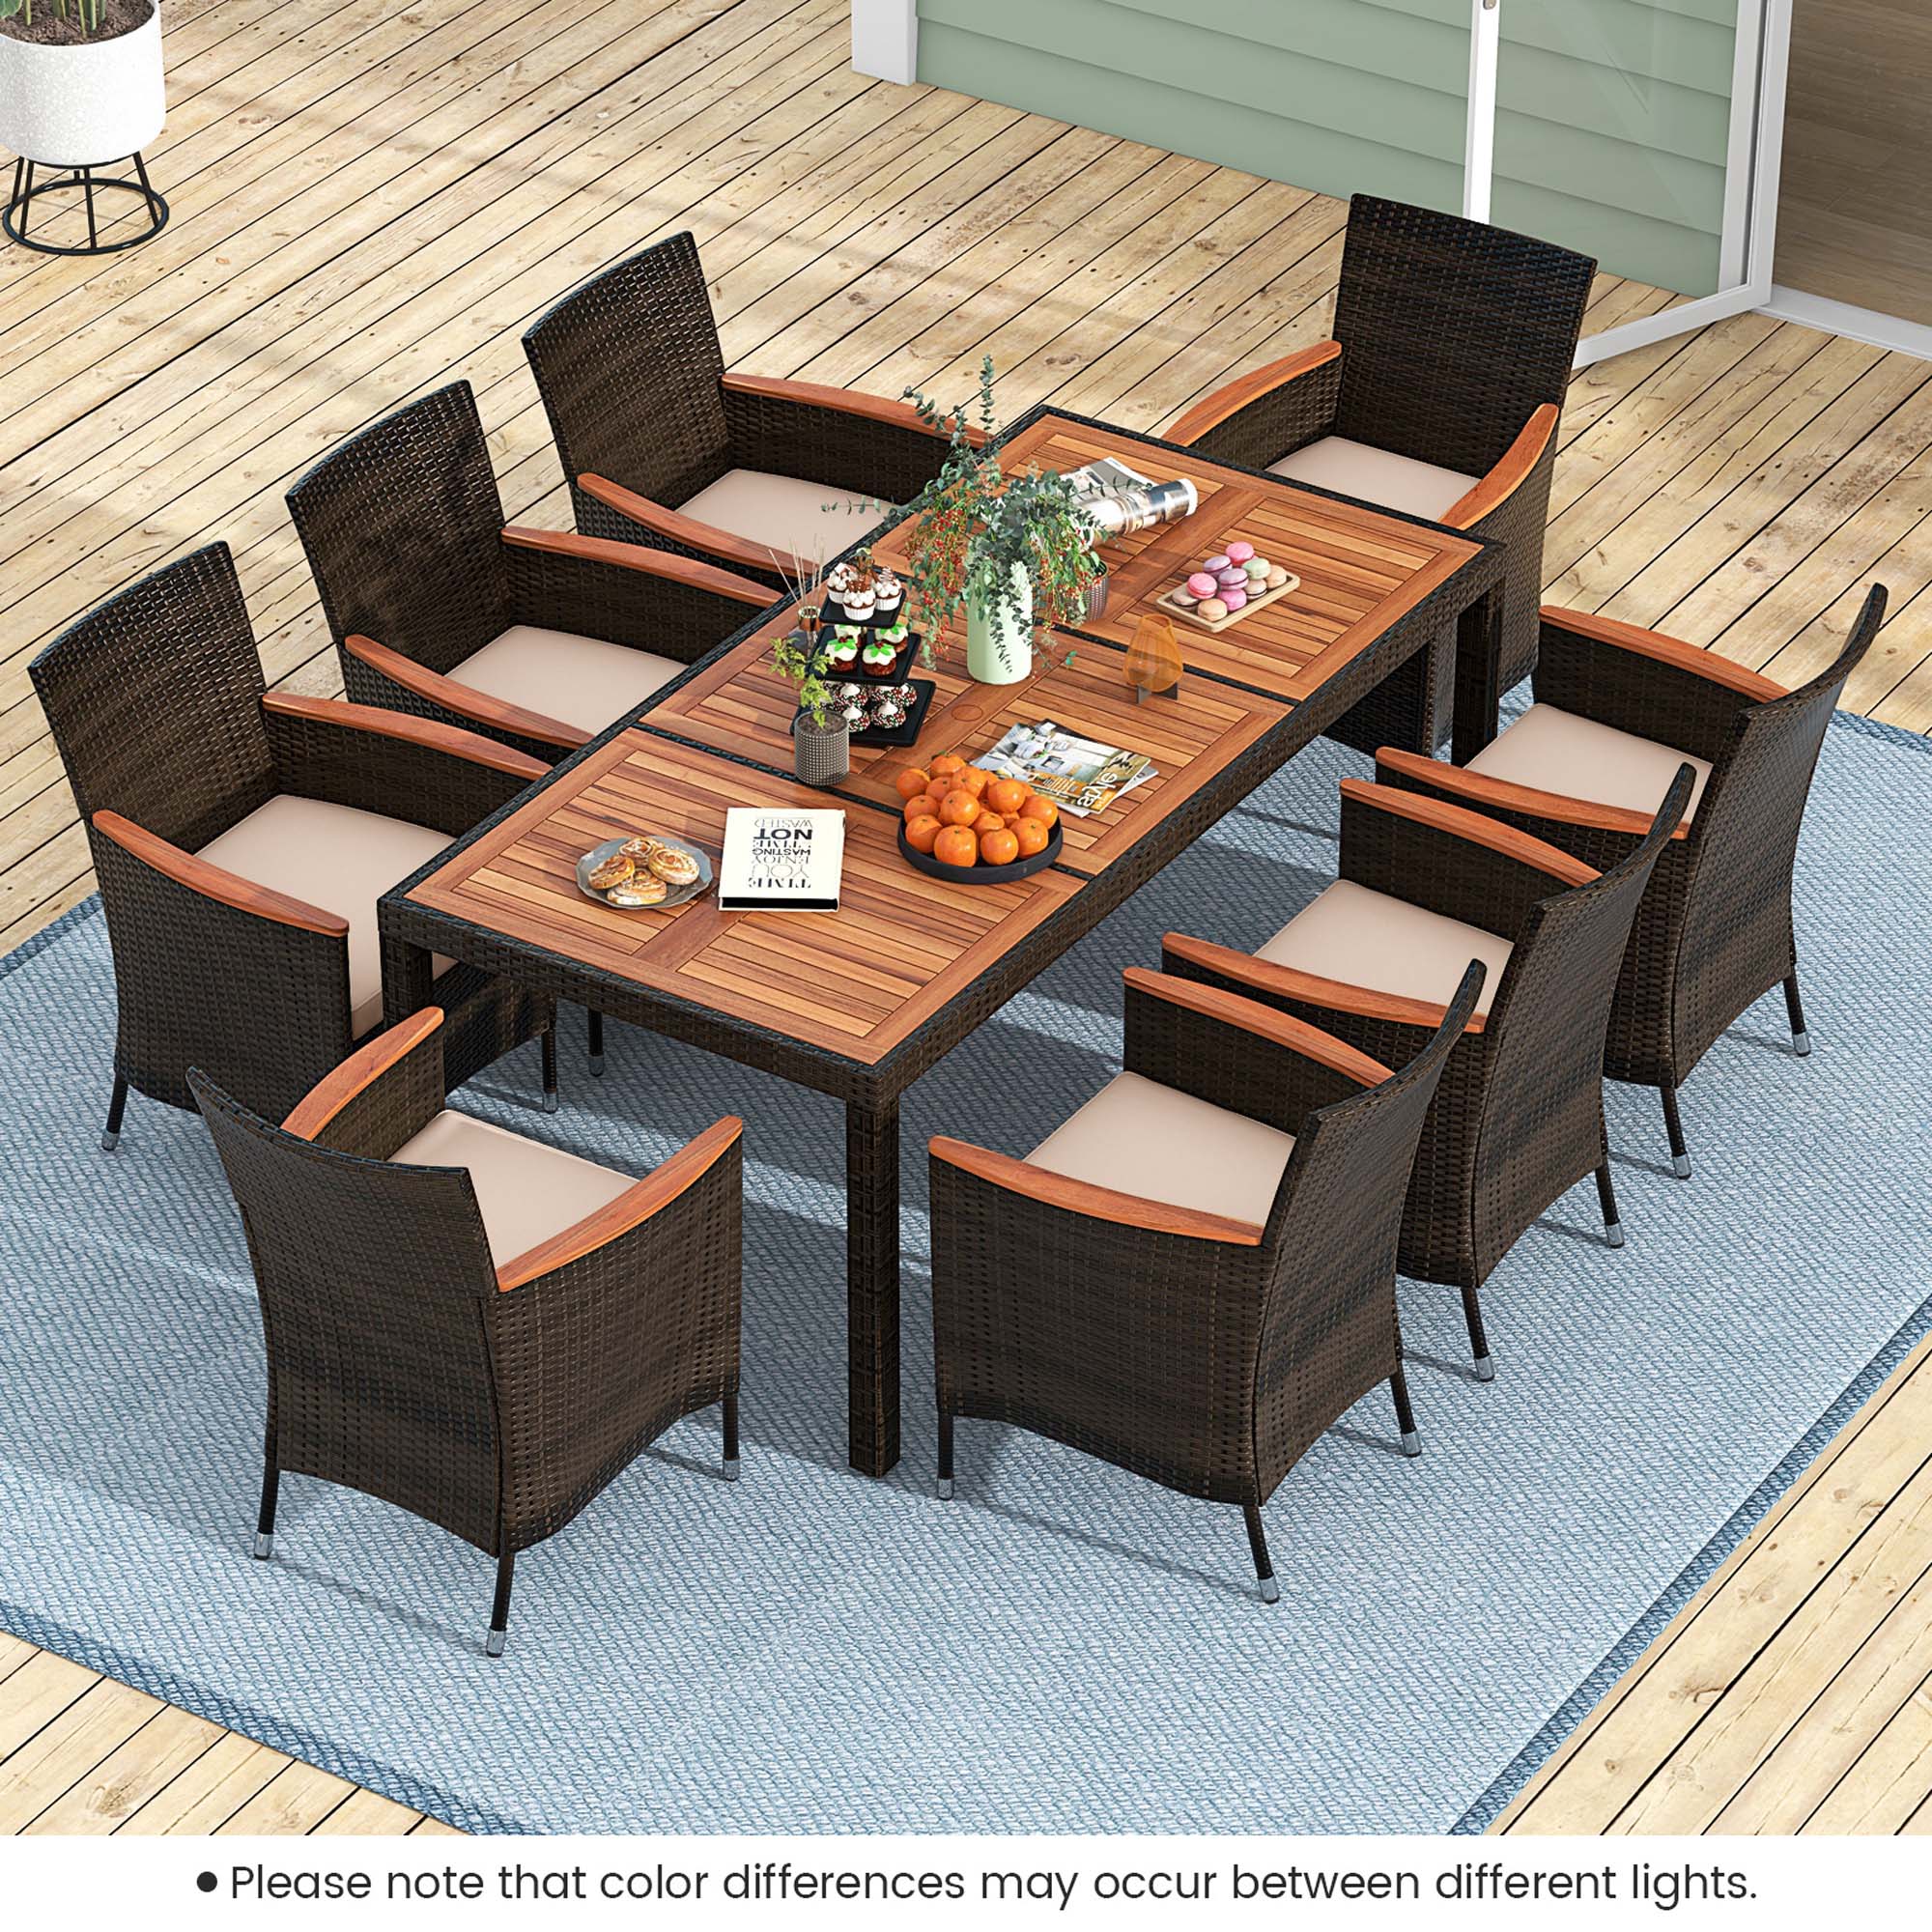 Costway 9PCS Patio Wicker Dining Set Acacia Wood Table Top Umbrella Hole Cushions Chairs - image 1 of 10